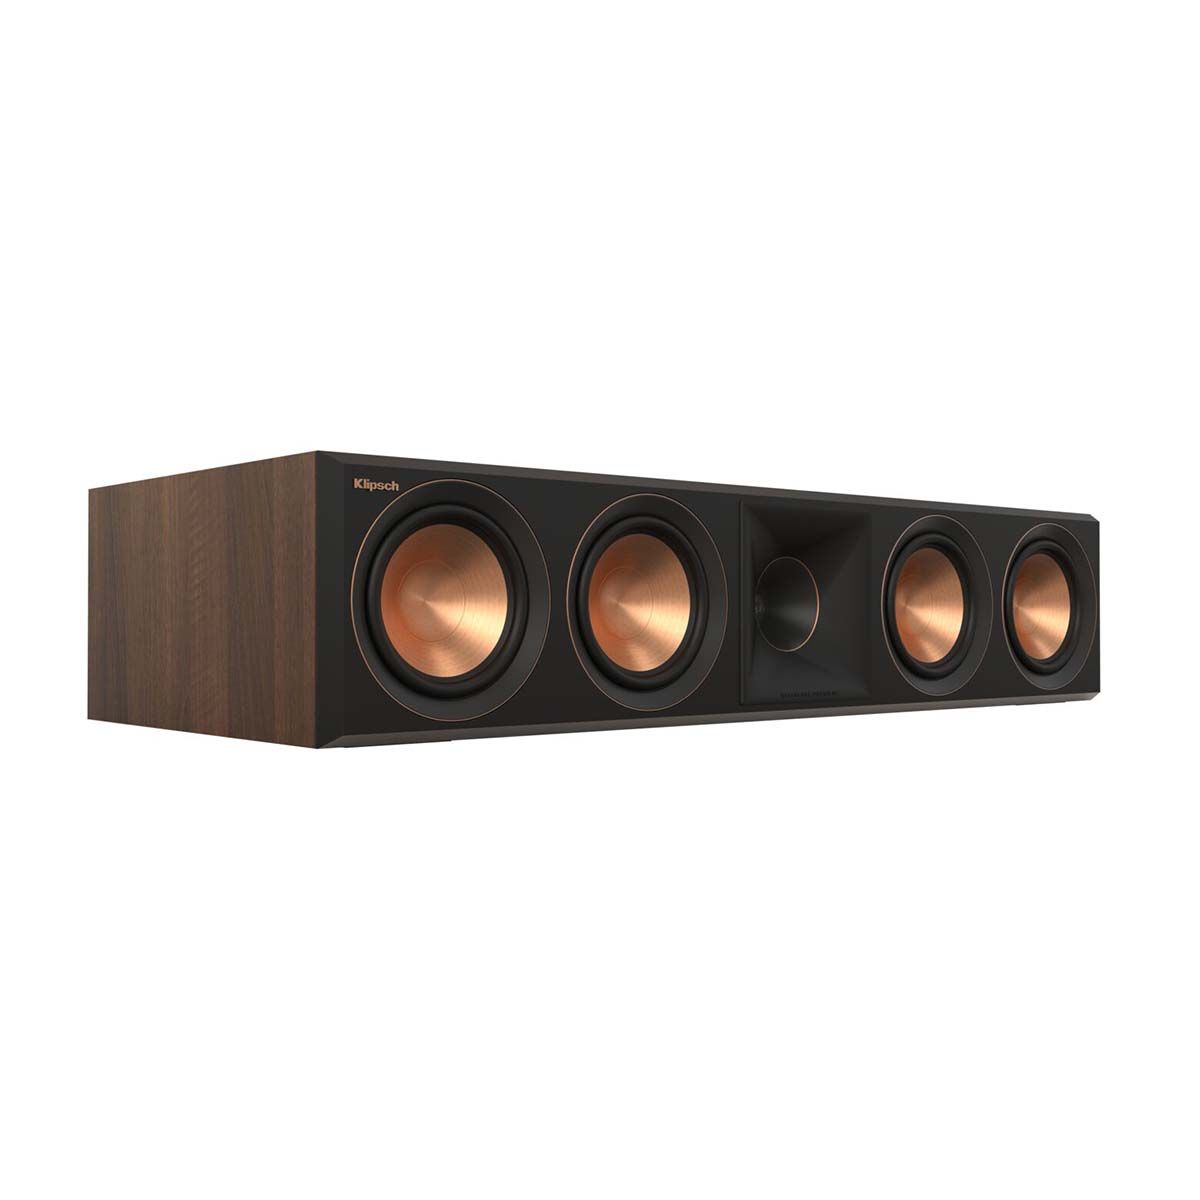 Klipsch RP-504C II Center Channel Speaker - Walnut - angled front view without grill